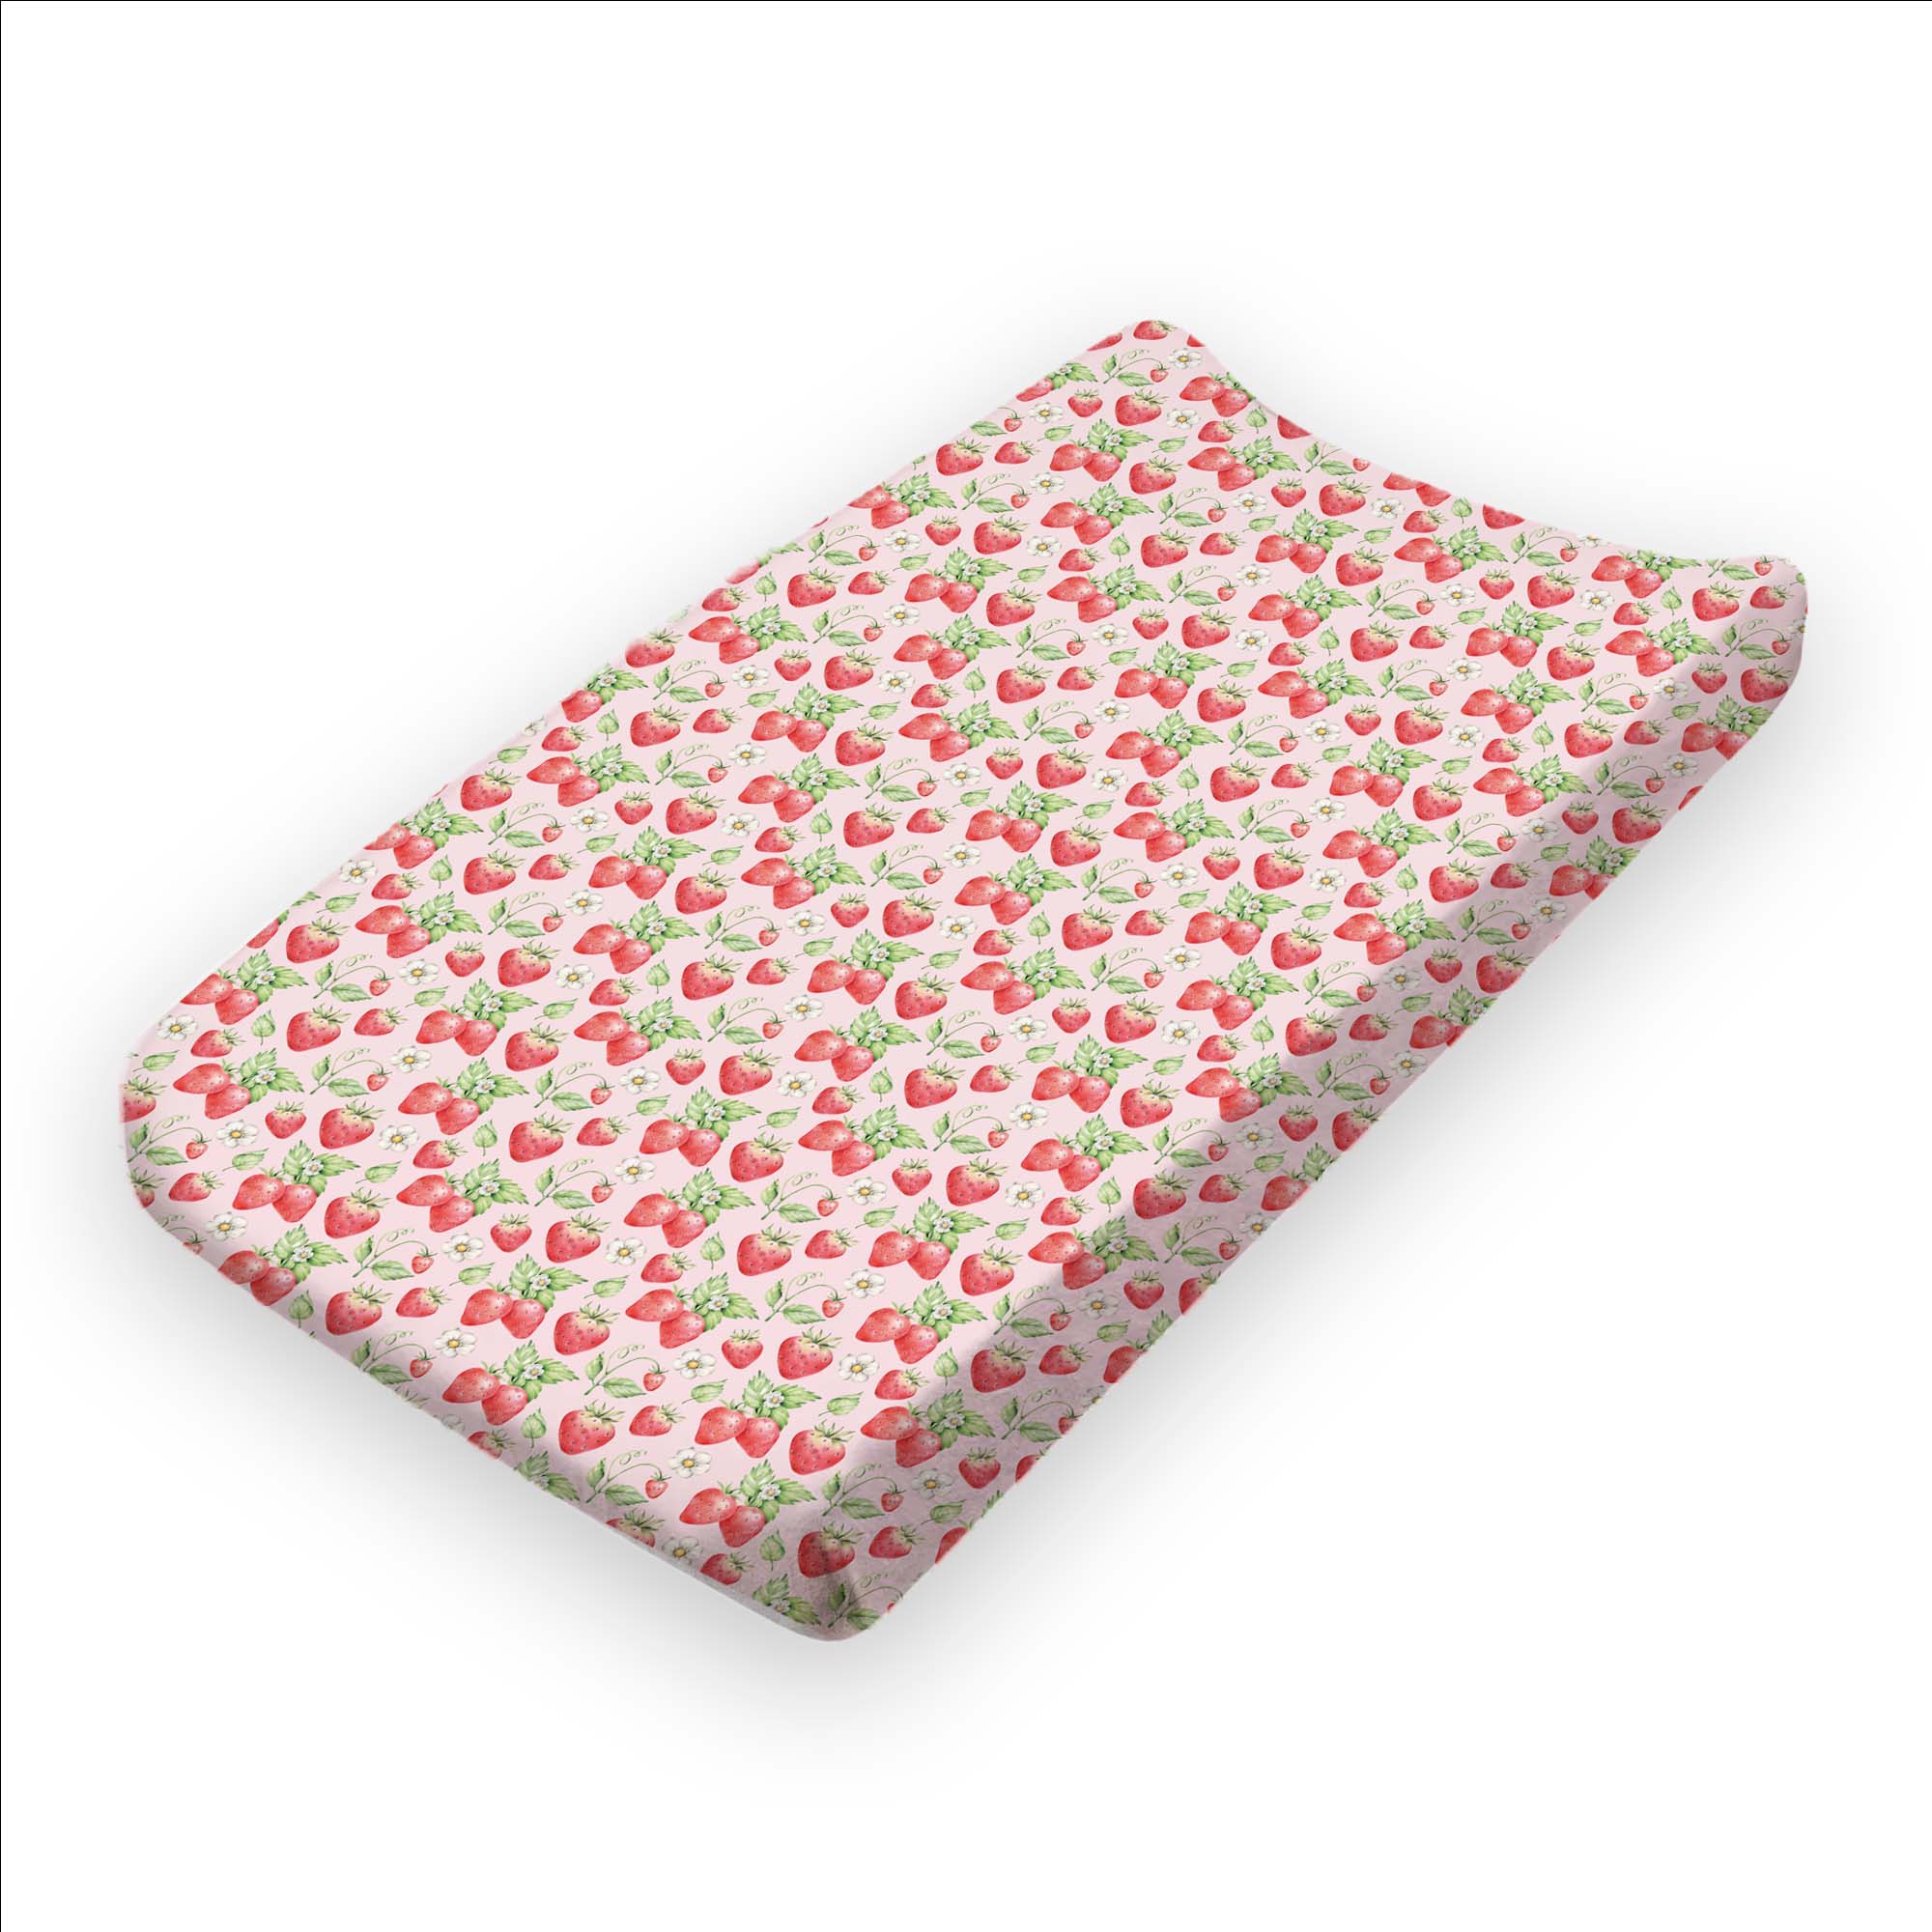 Claire Changing Pad Cover: FINAL SALE